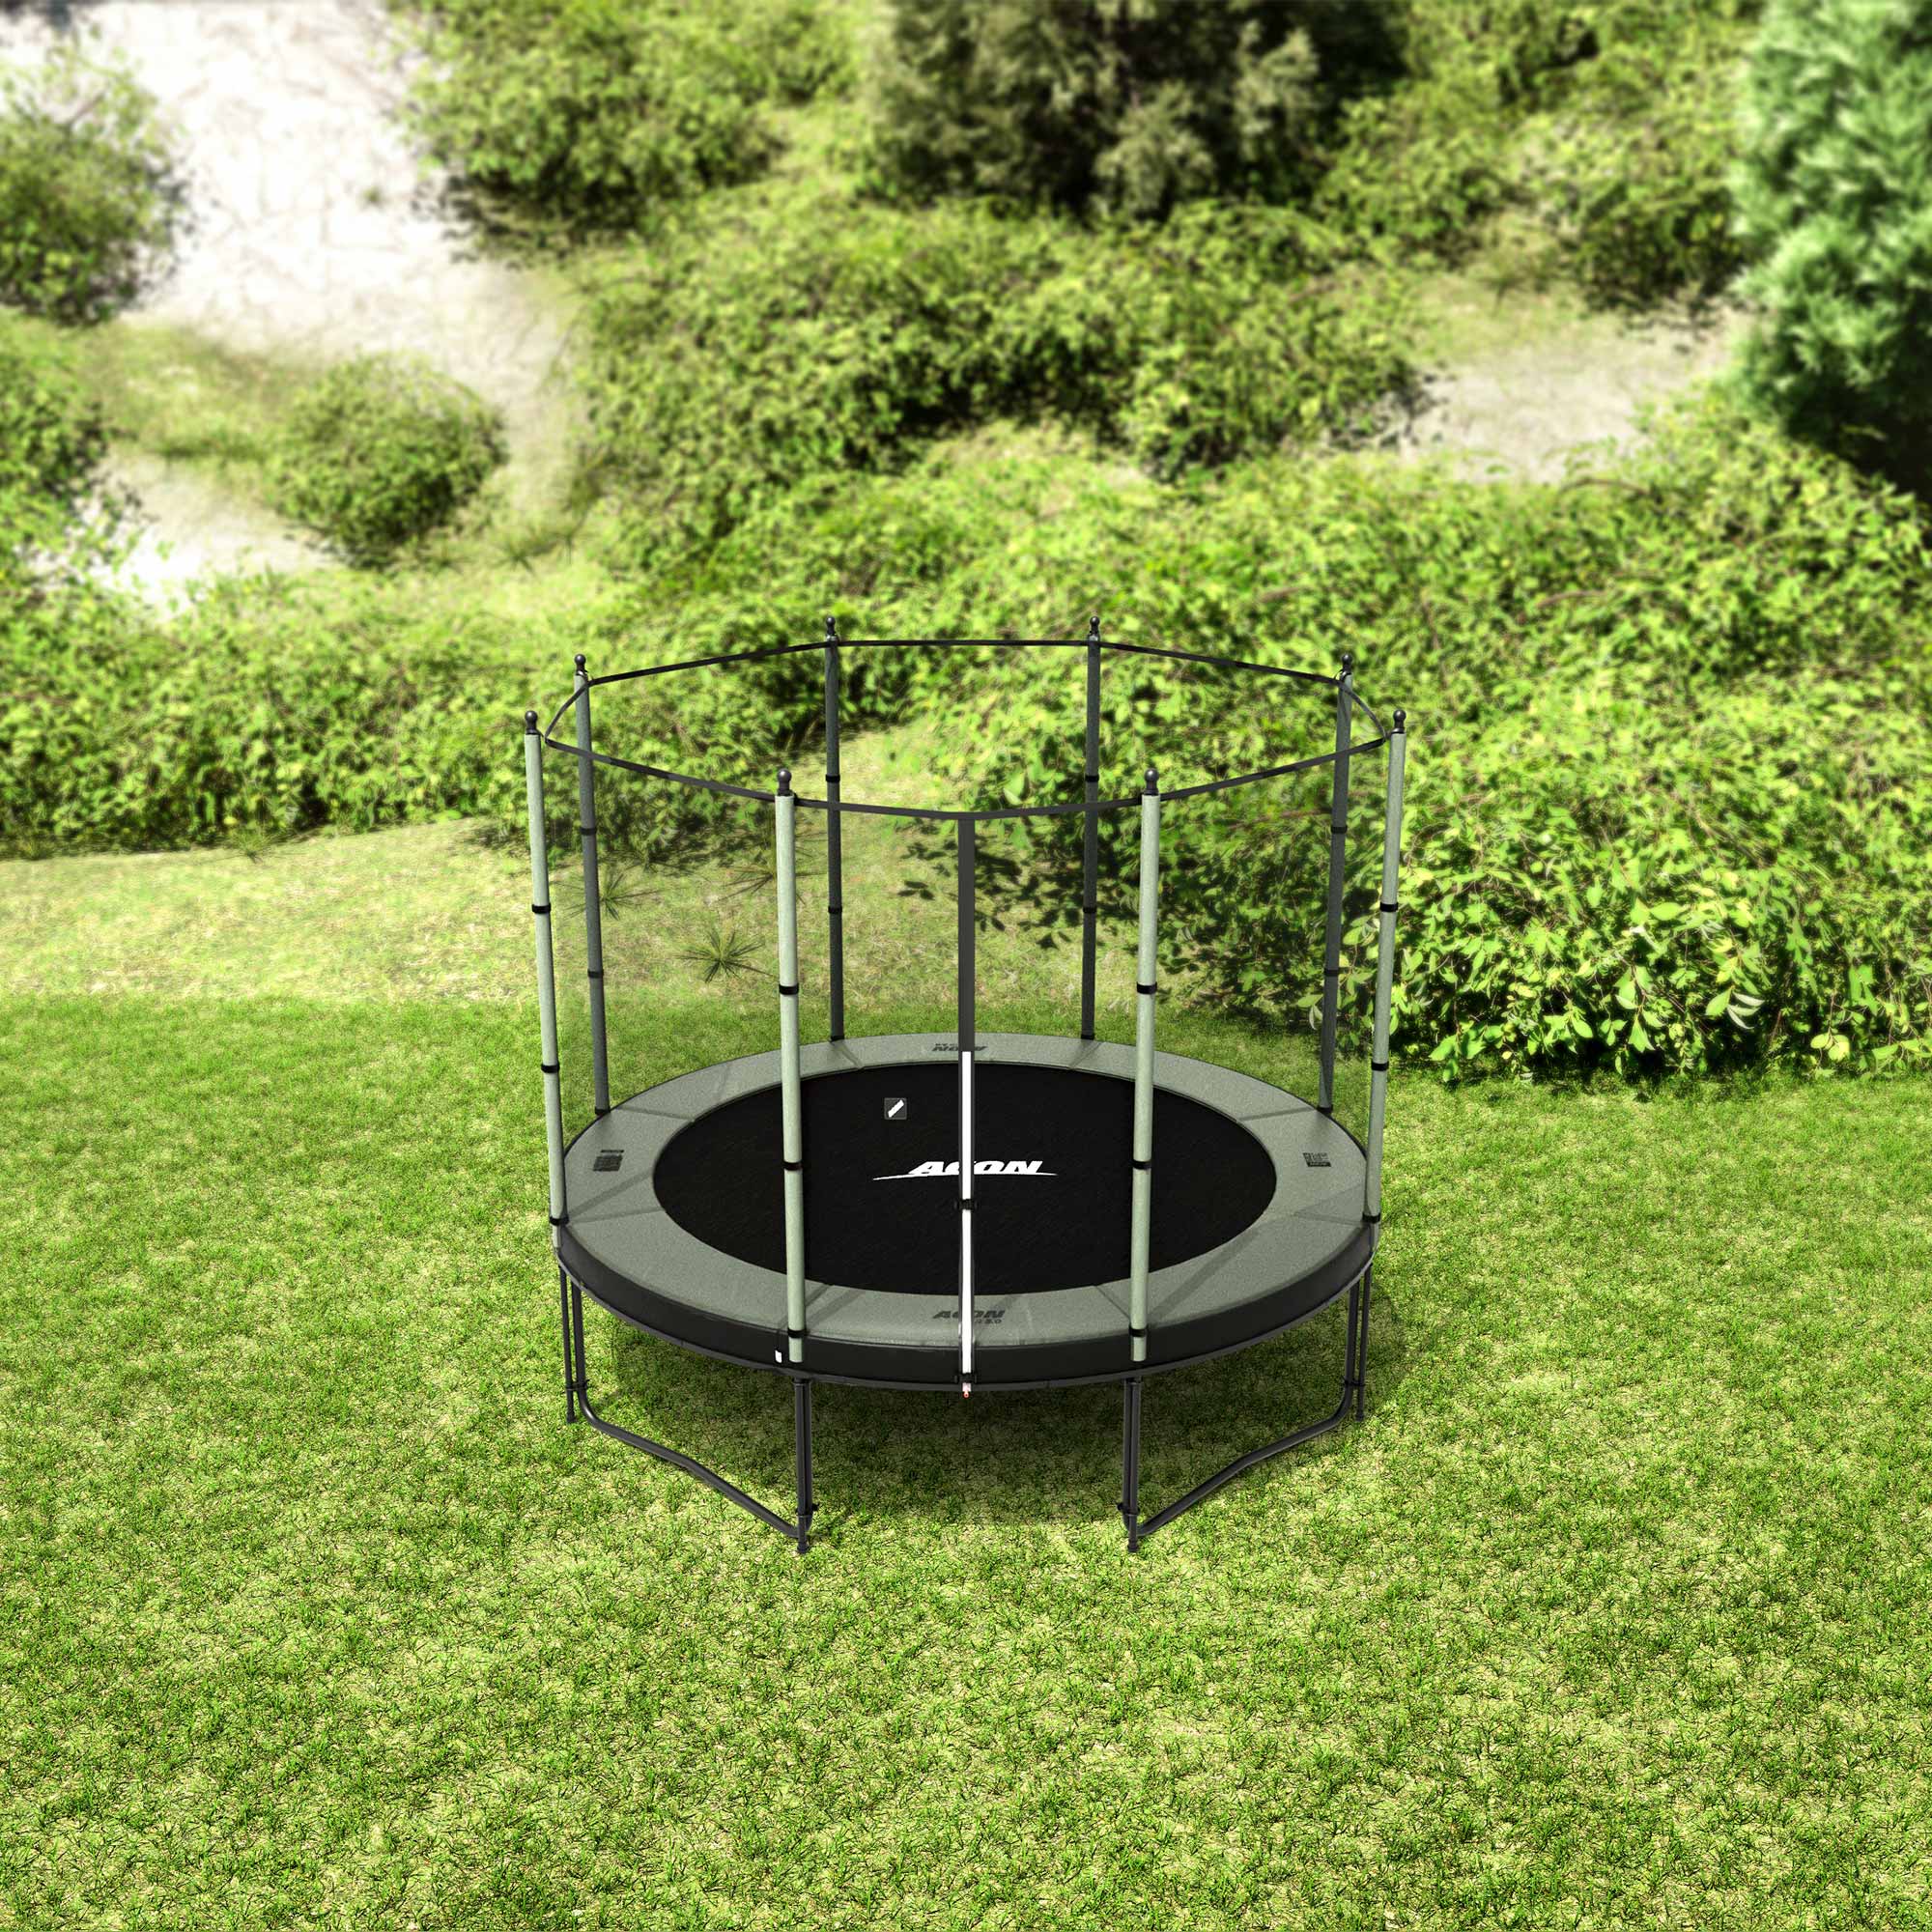 ACON Air 3,0m Trampoline with Standard Enclosure in the backyard.